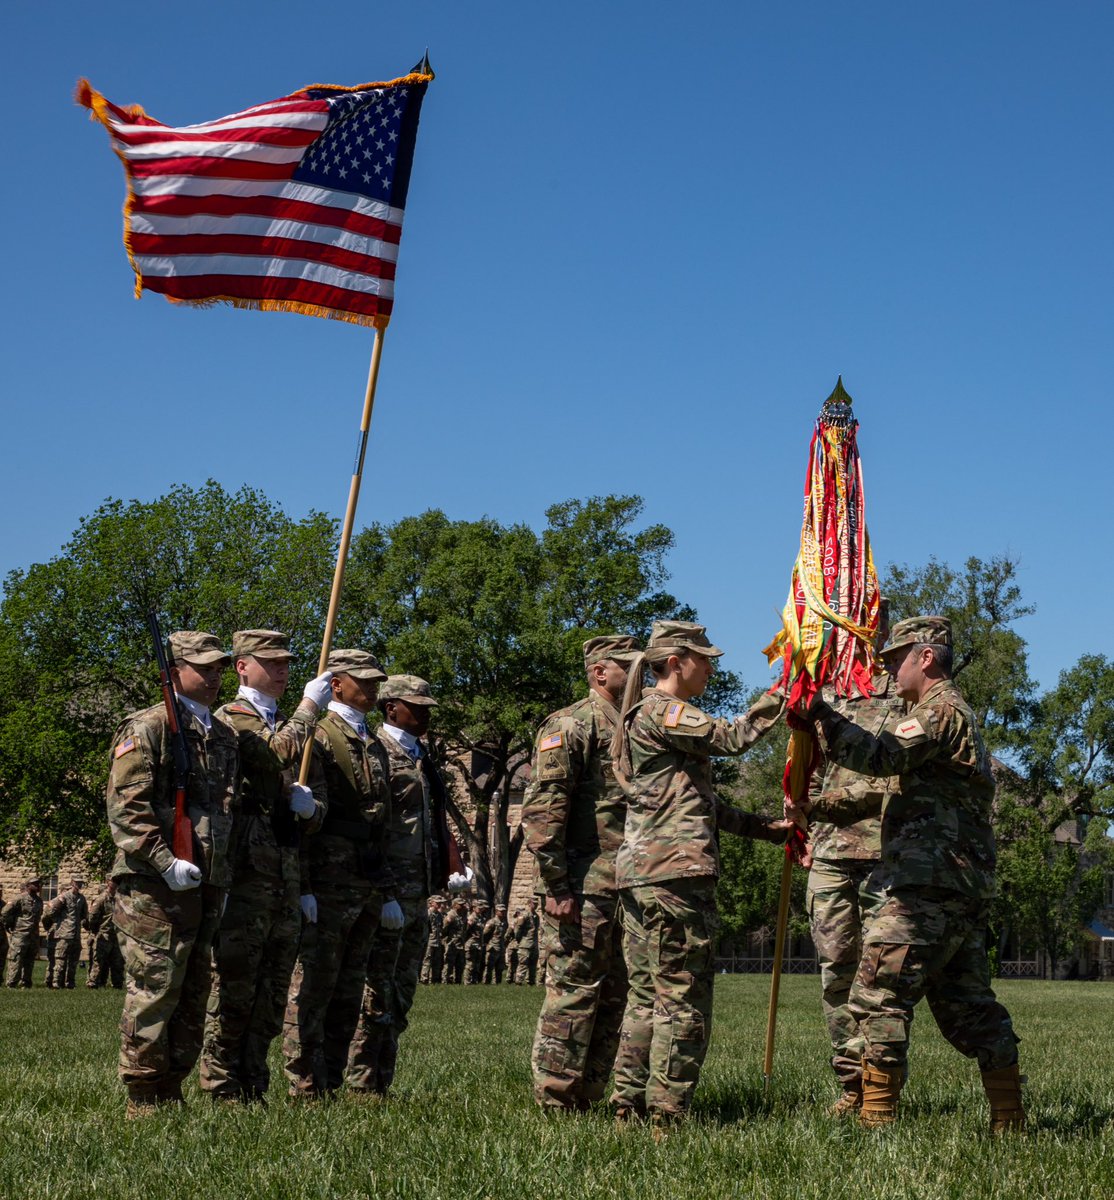 Yesterday, the 299th Brigade Support Battalion, 2nd Armored Brigade Combat Team, 1st Infantry Division, said goodbye to Lt. Col. Brian Braithwaite and welcomed Lt. Col. Hannah Caldwell to their team at a change of command ceremony held at Cavalry Parade Field on Fort Riley.